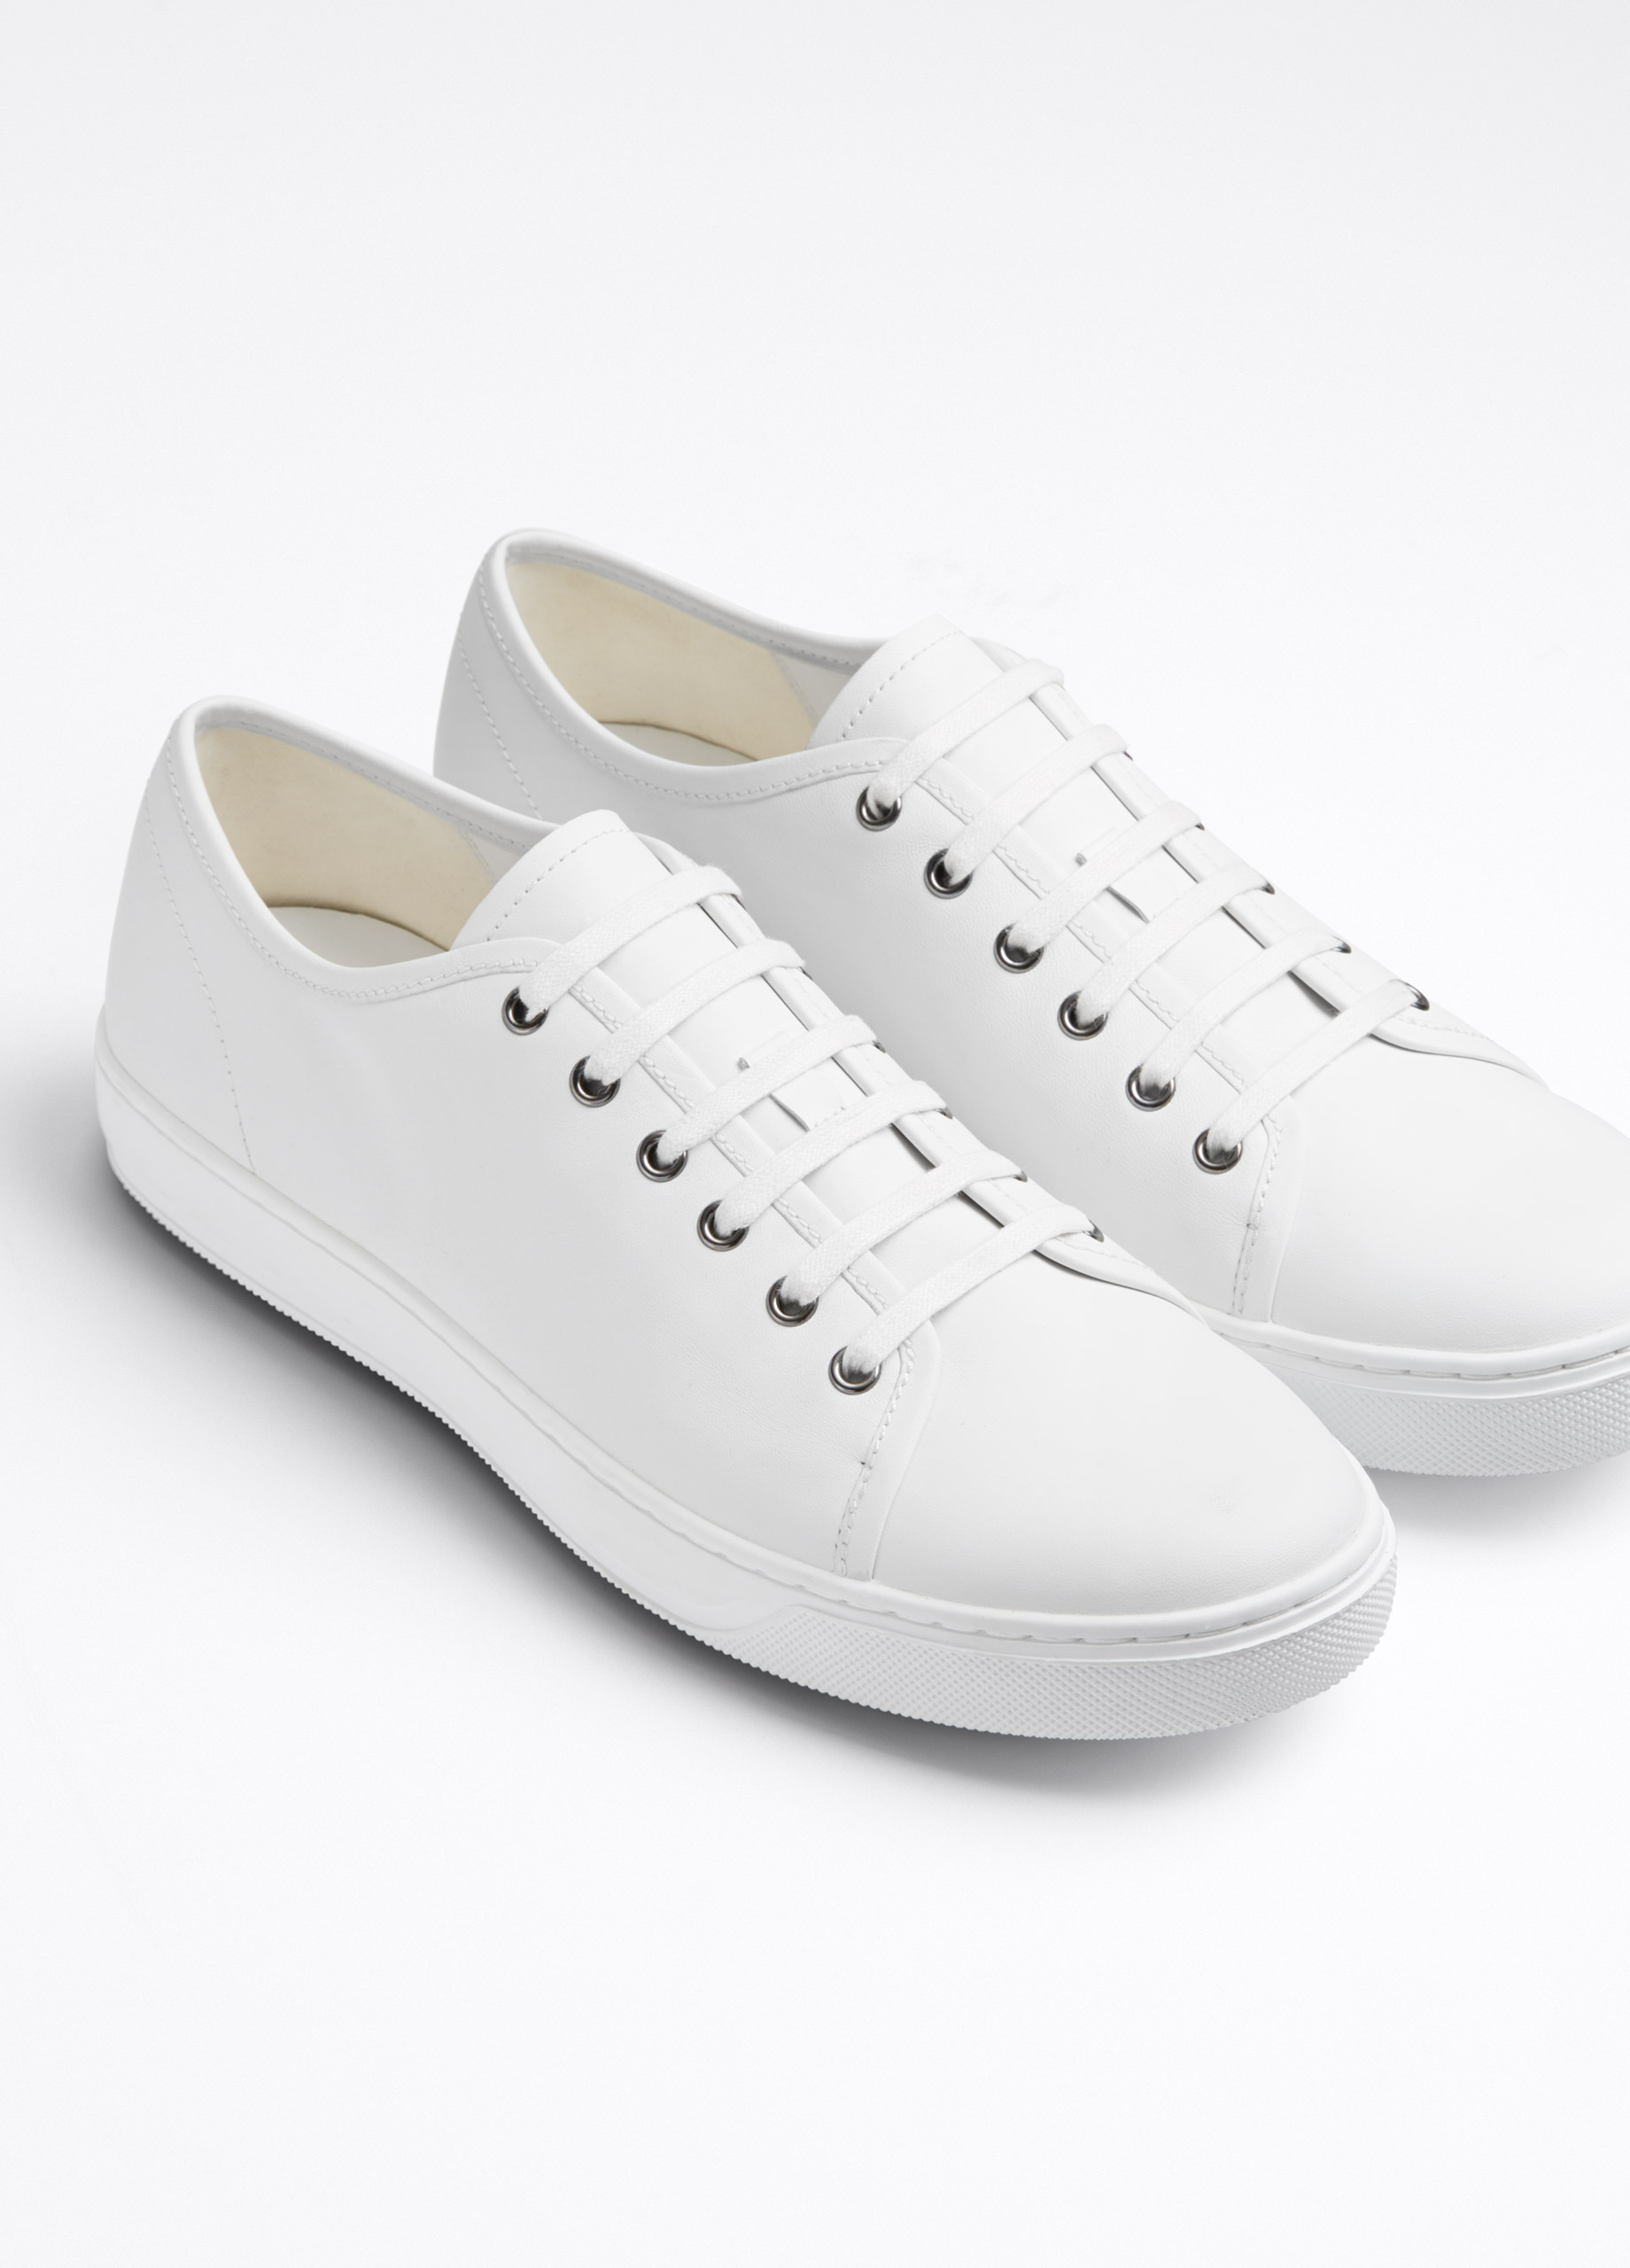 Vince Austin Leather Sneaker in White - Lyst